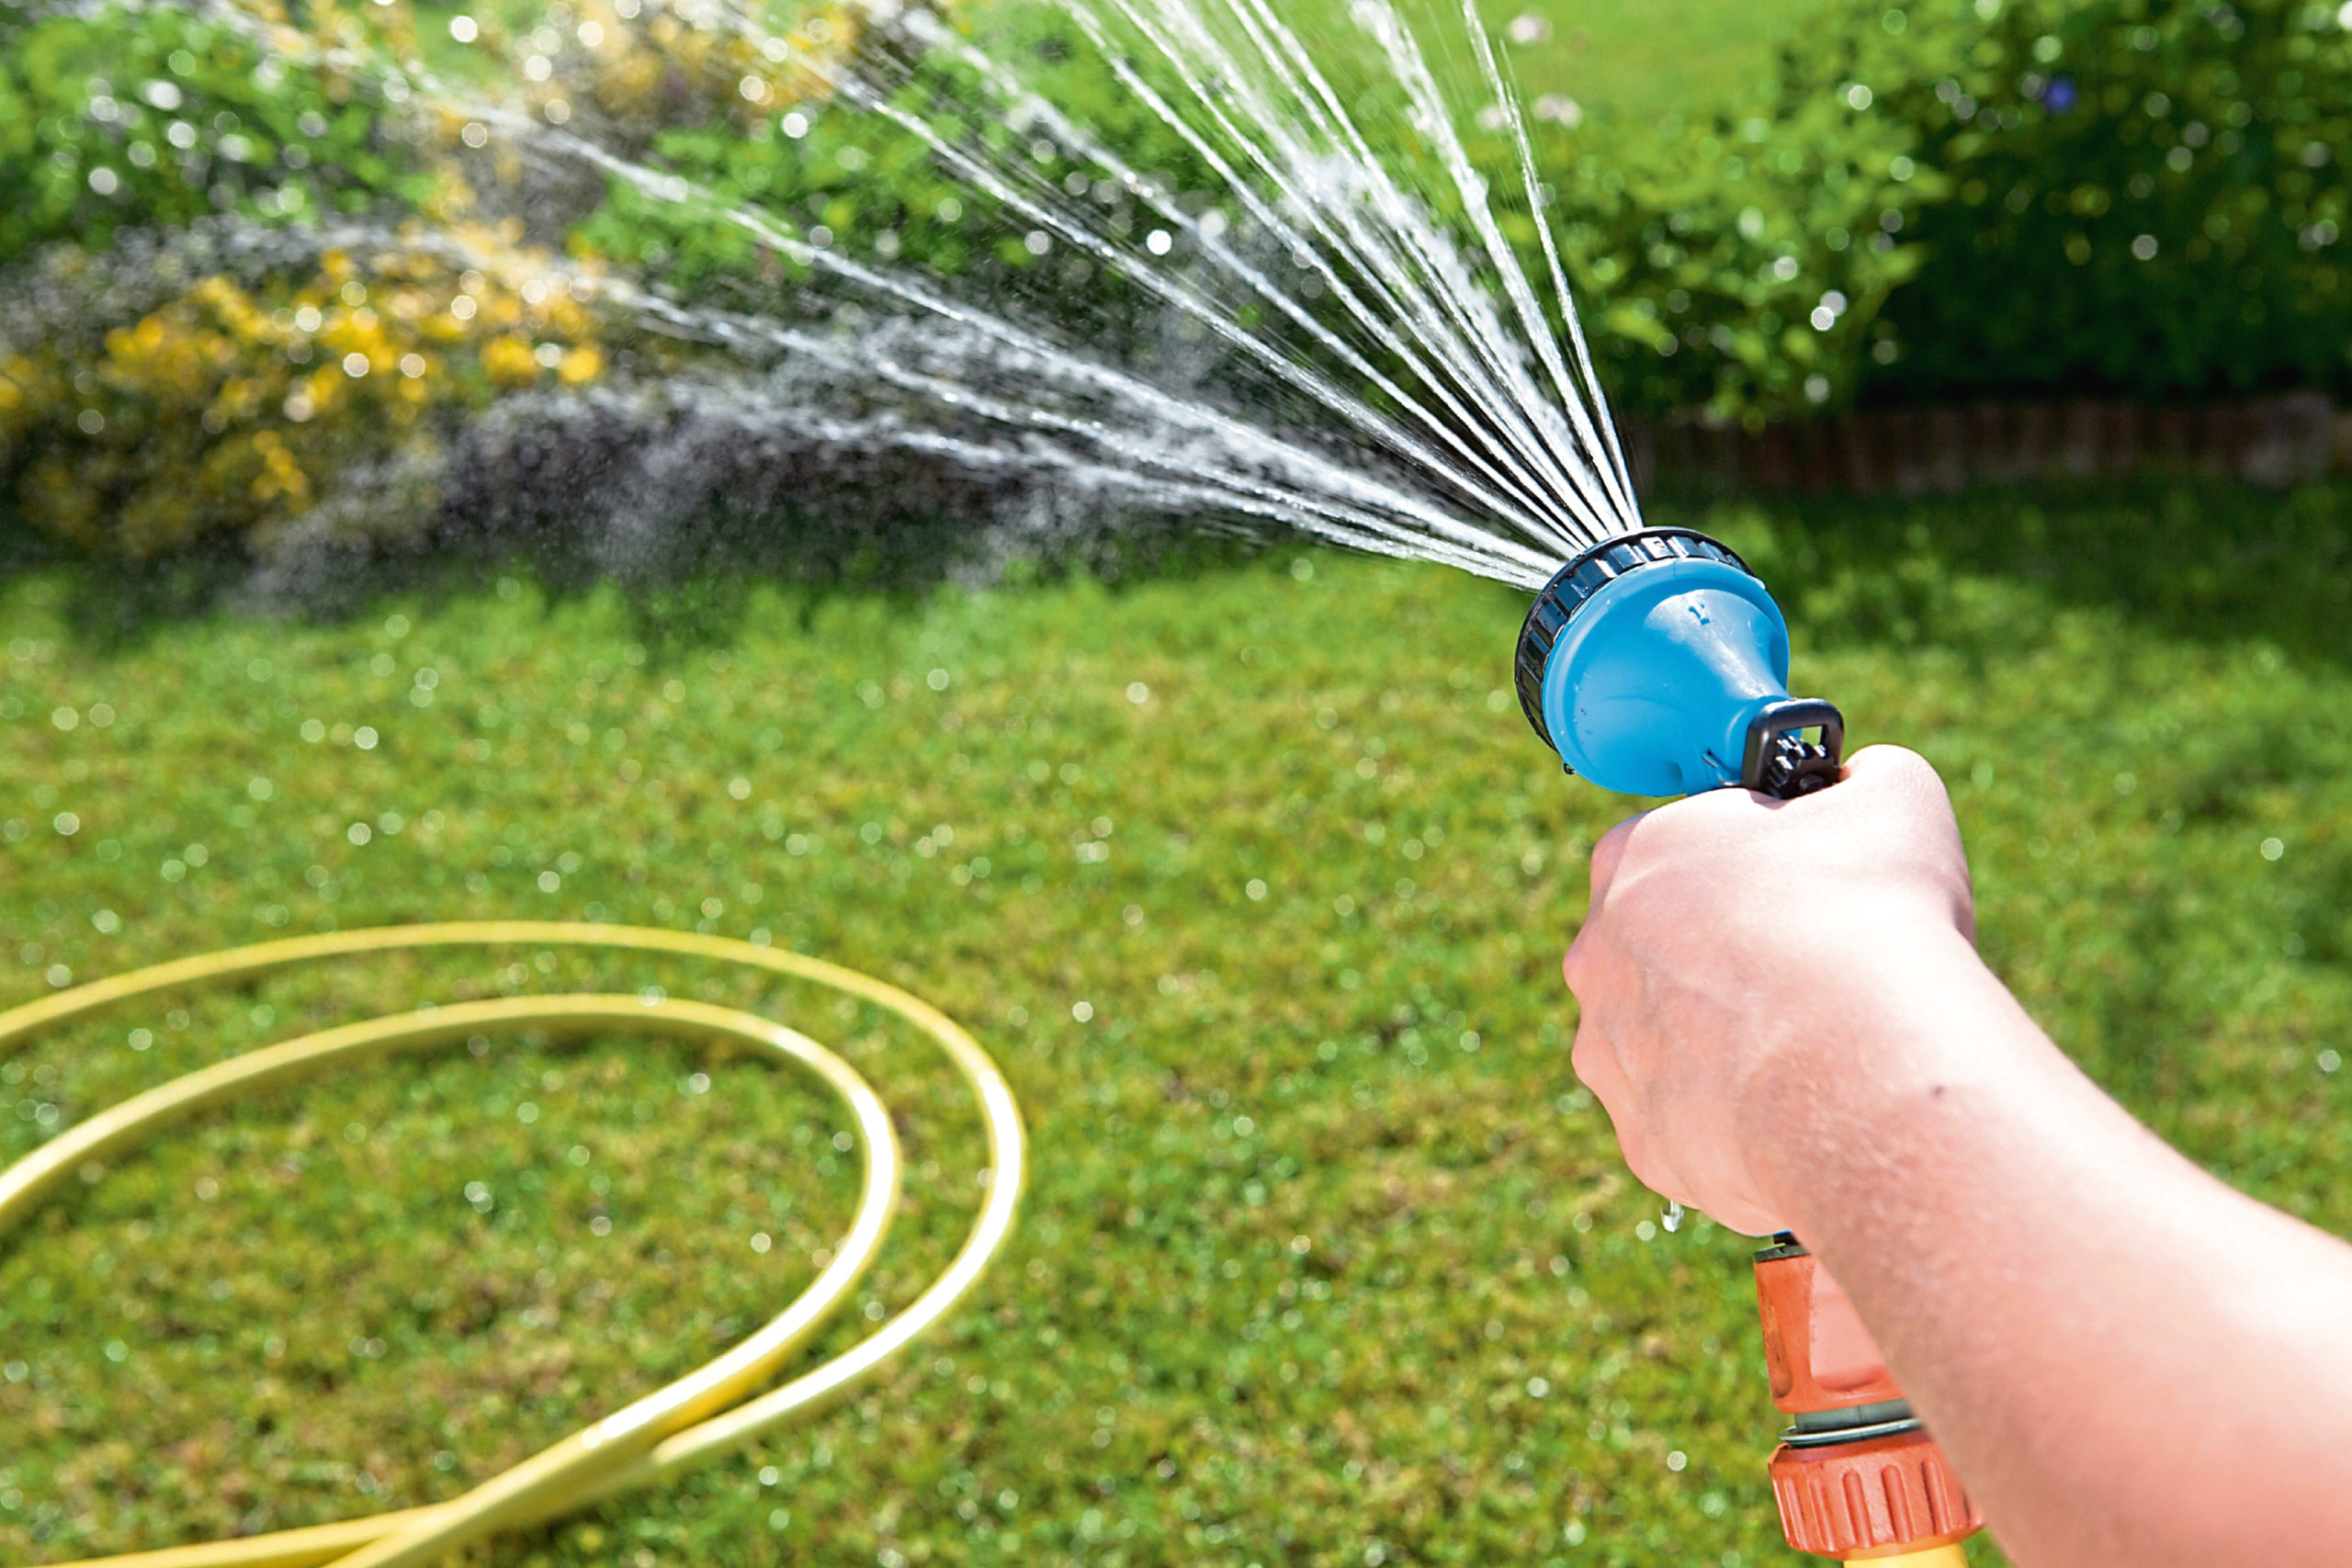 Fifers are being asked to avoid using garden hoses.